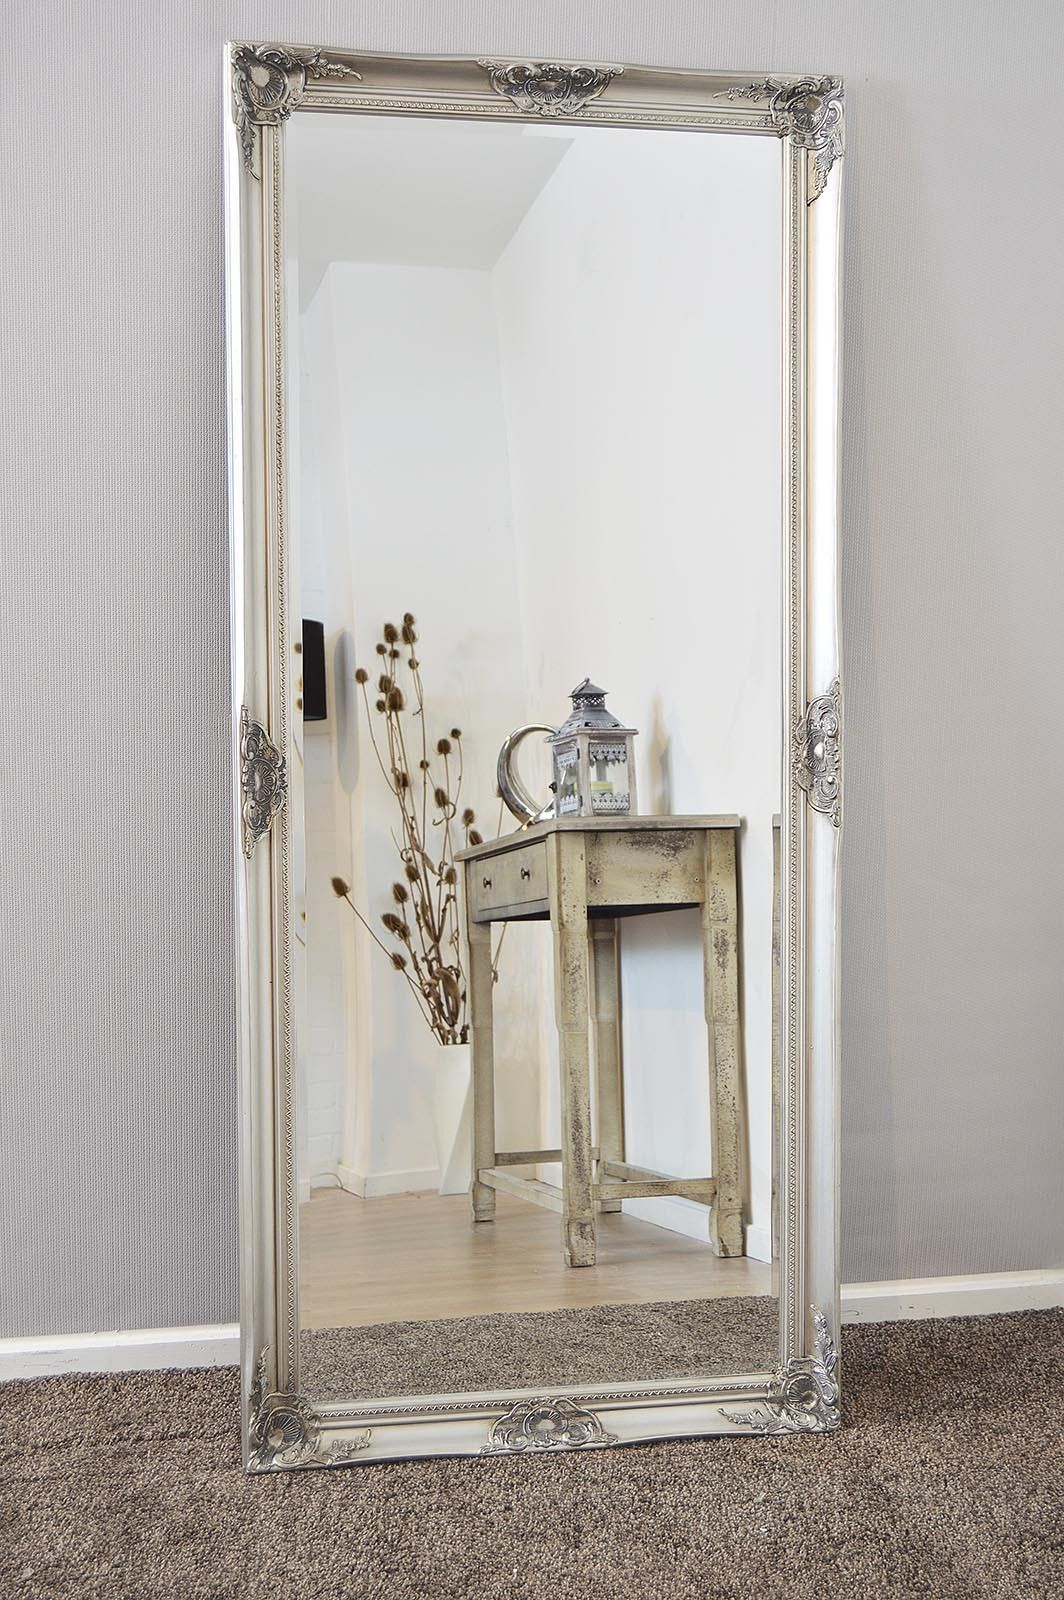 New Large Silver Decorative Shab Chic Wall Mirror 5ft3 X 2ft5 With Regard To Shabby Chic Wall Mirrors (View 8 of 15)